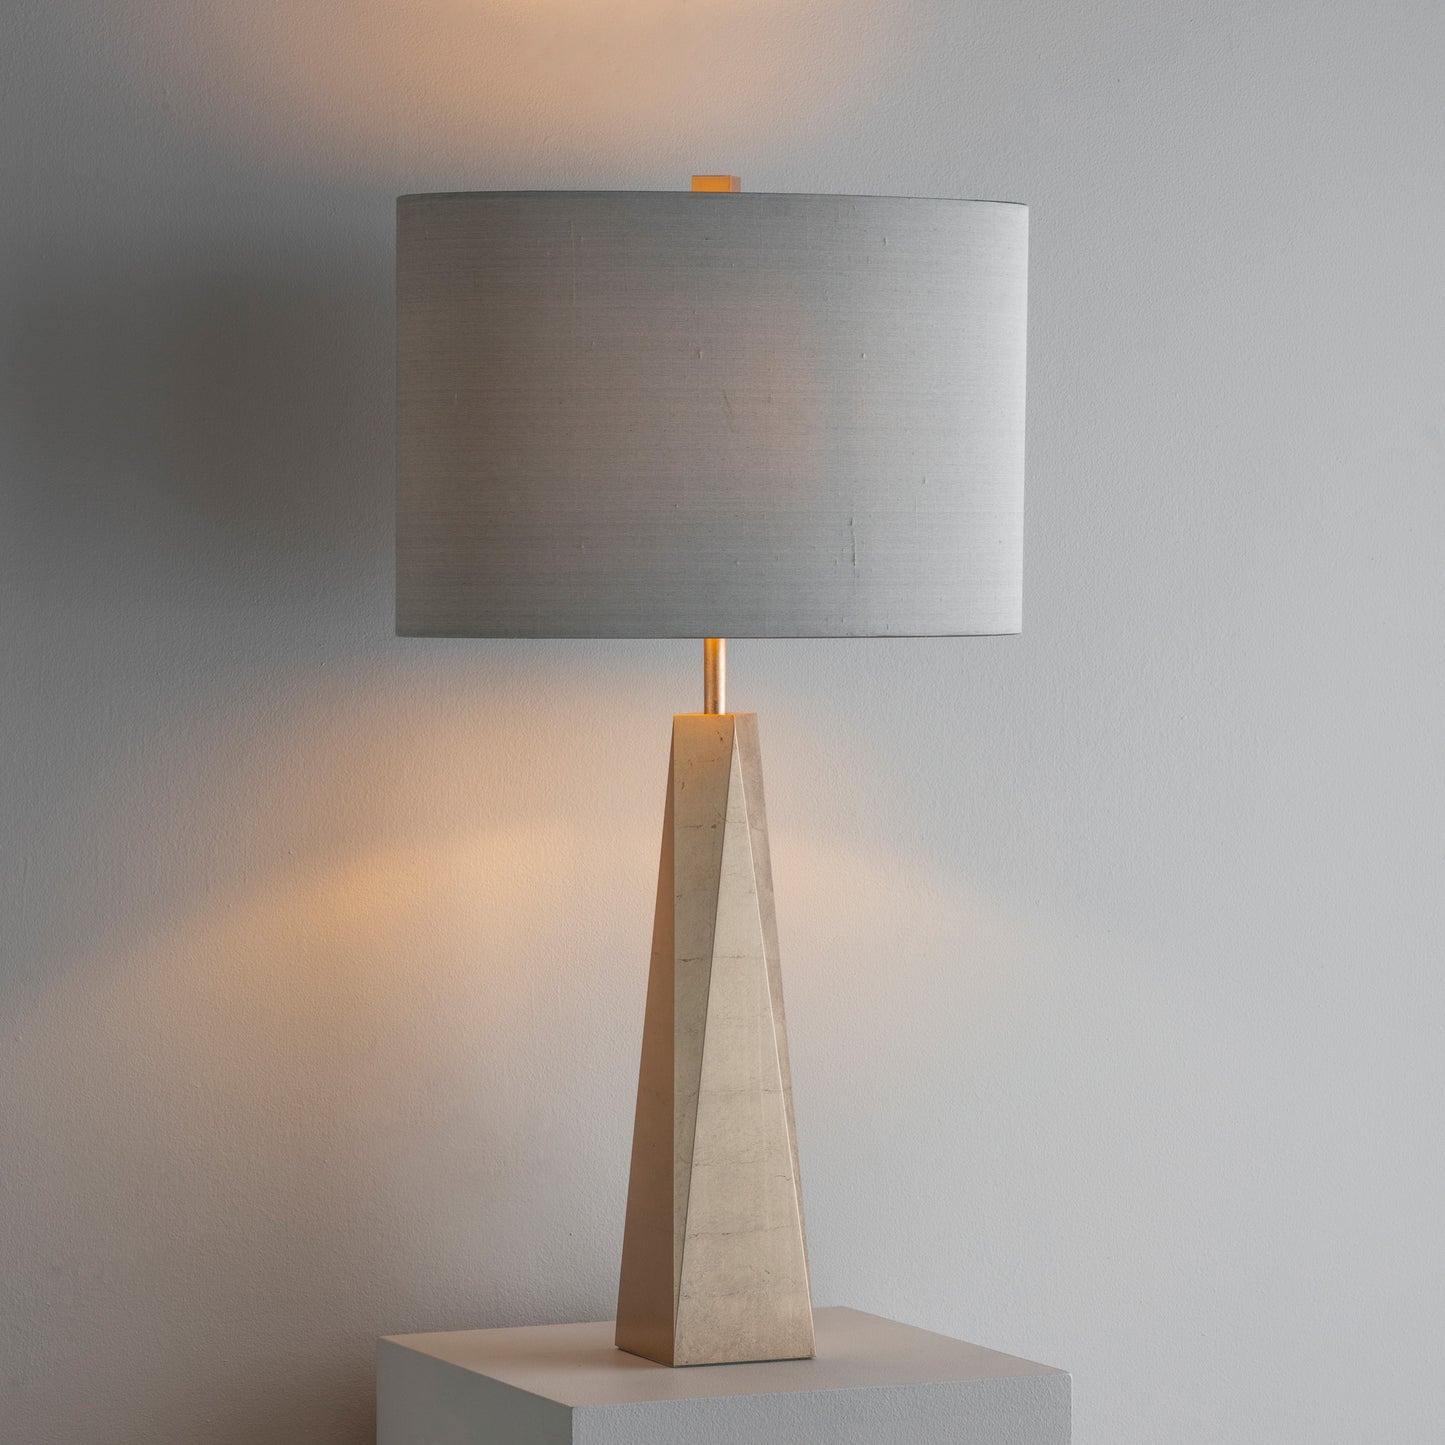 Ex-Display Surface Table Lamp in Gilded Champagne with a Birch Shade - 1012